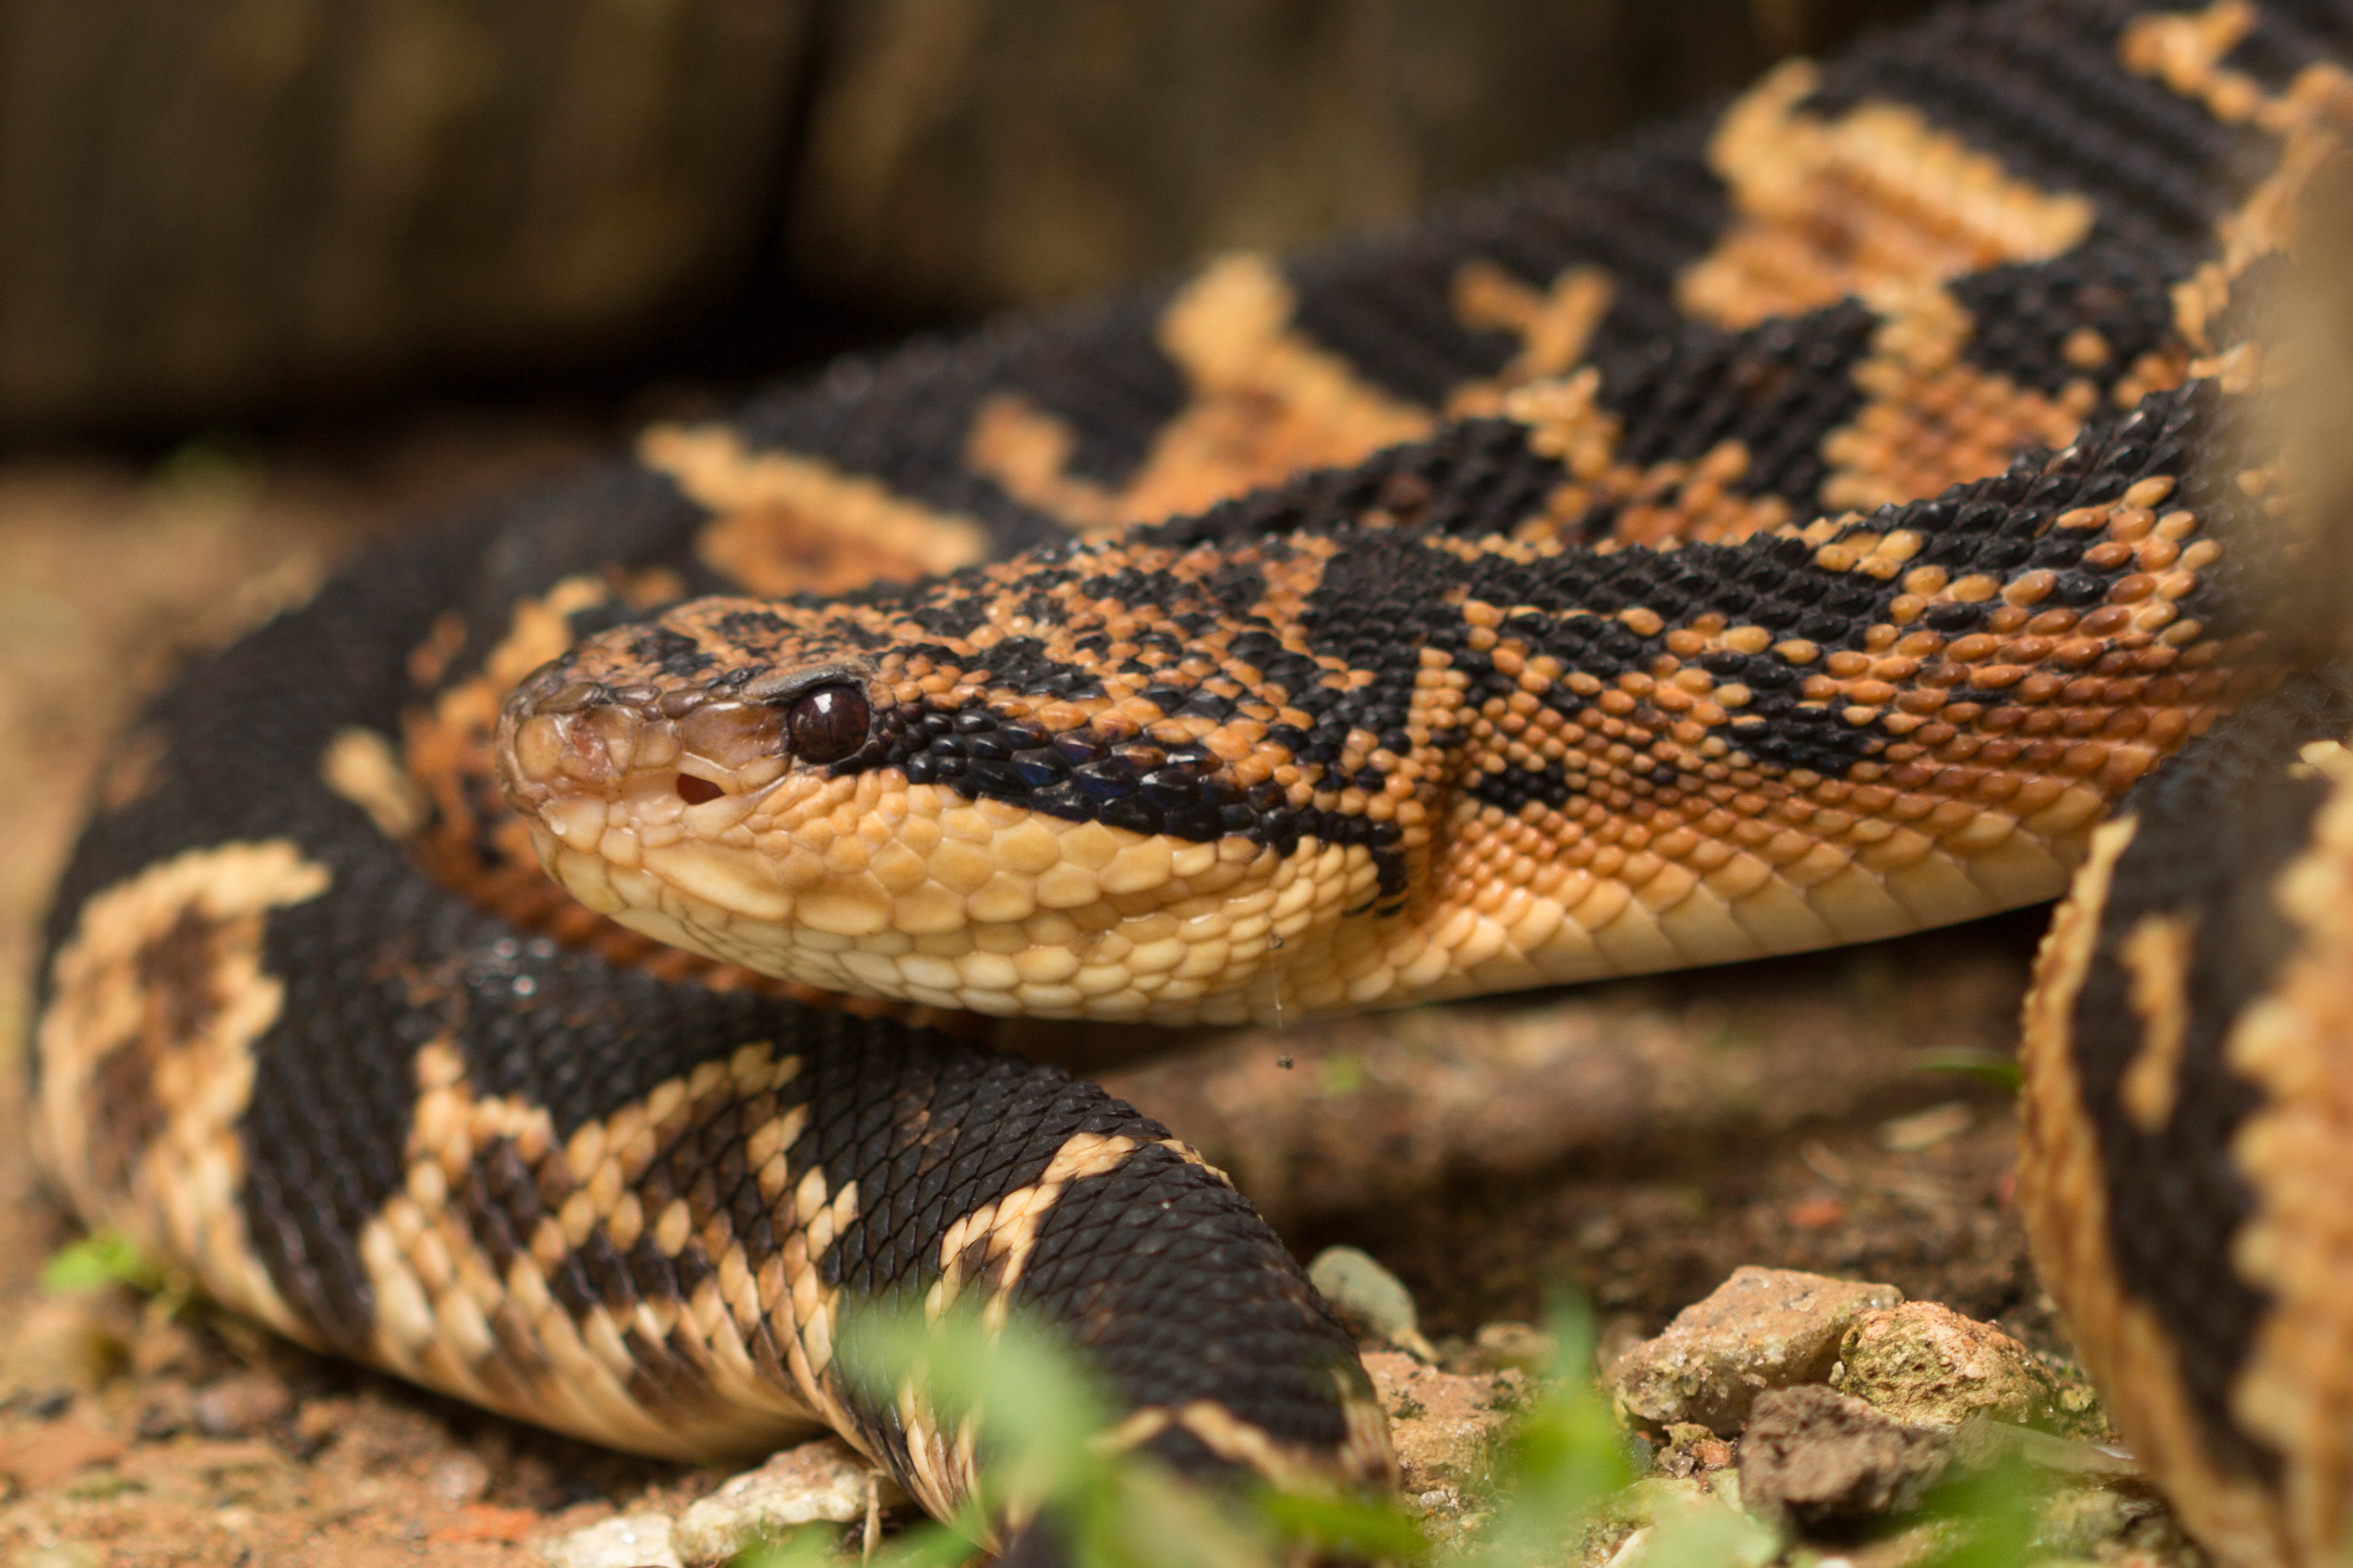 Brazilian researchers discover two novel peptides with biotechnological potential in snake venom